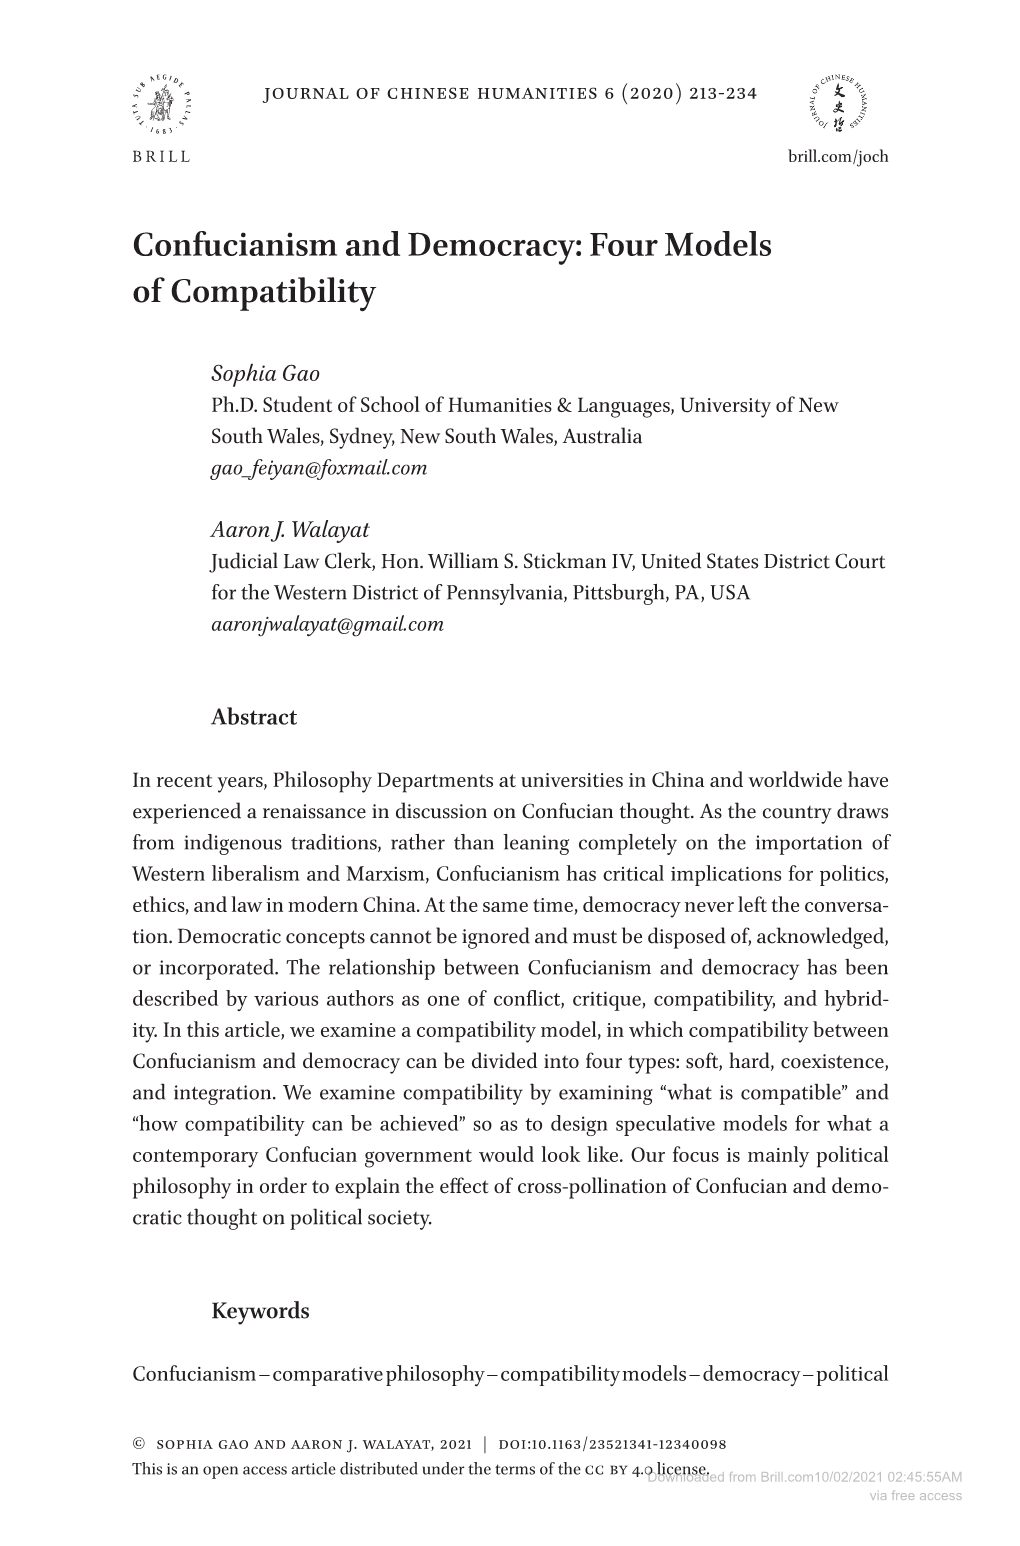 Confucianism and Democracy: Four Models of Compatibility